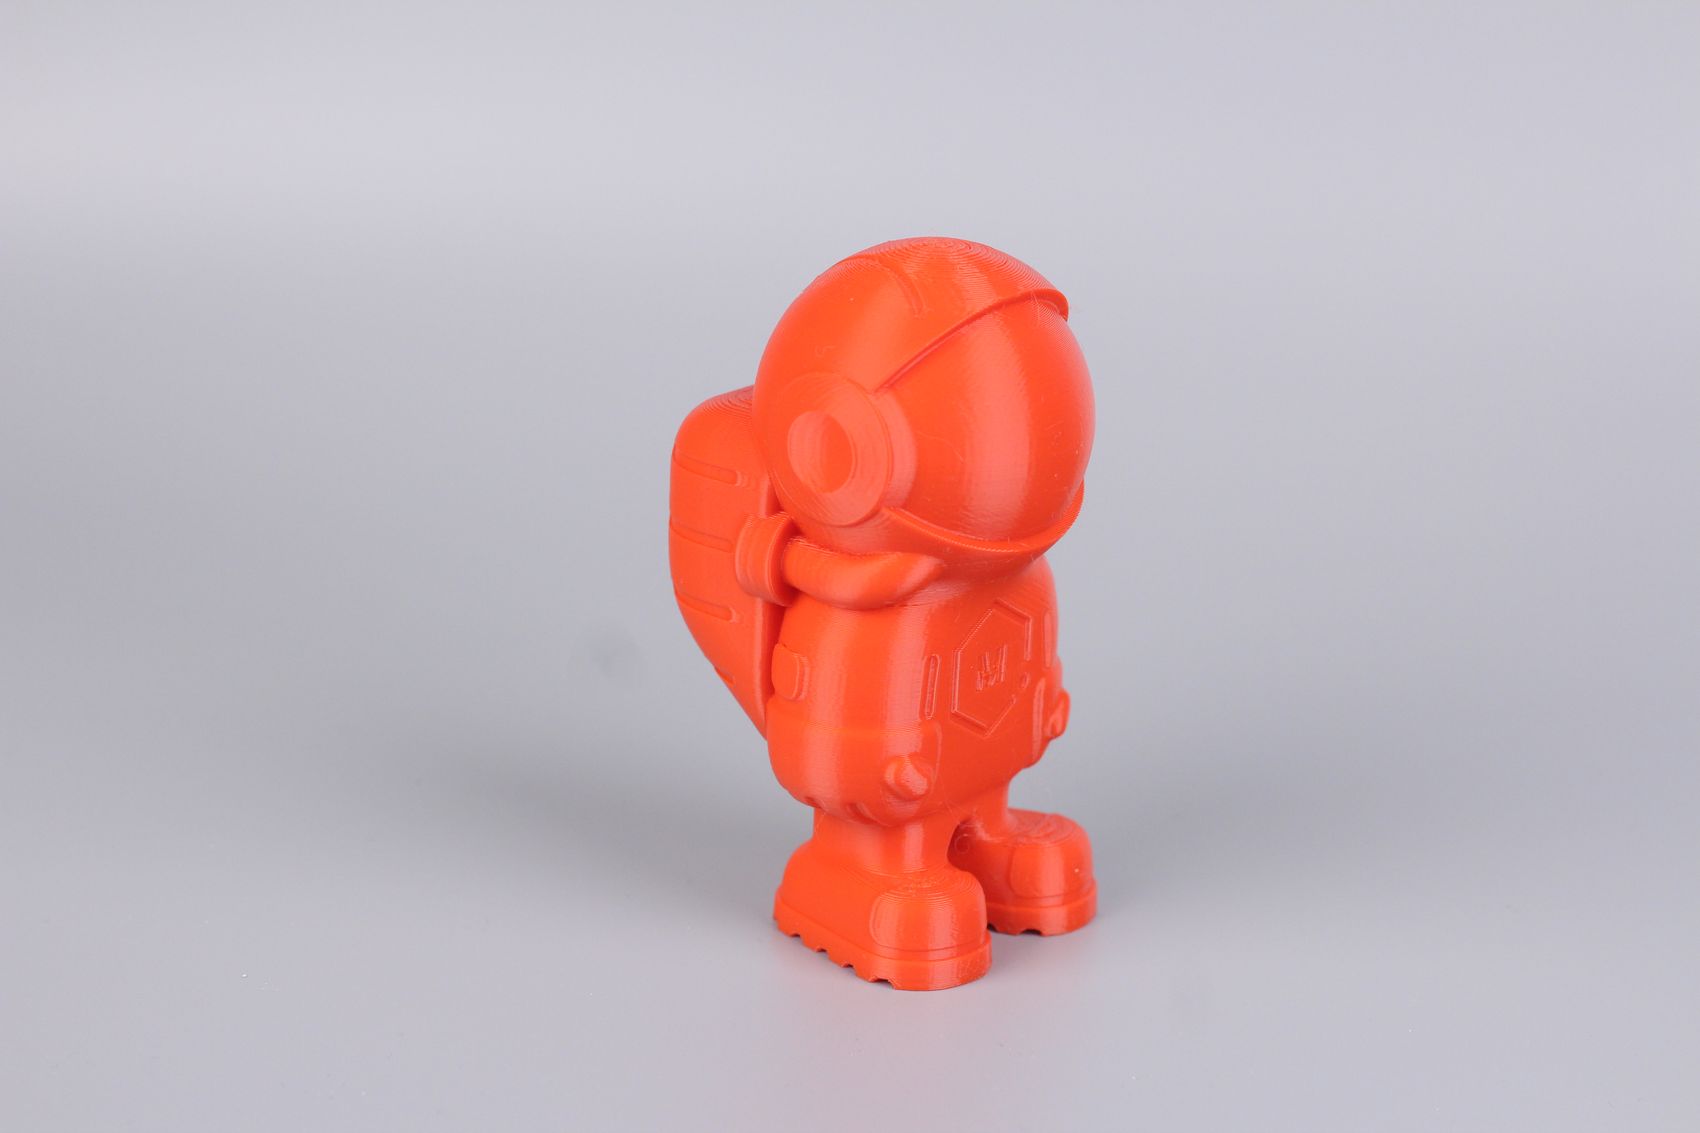 Phil A Ment PLA print on Ender 5 S12 | Creality Ender-5 S1 Review: Is it a worthy upgrade?